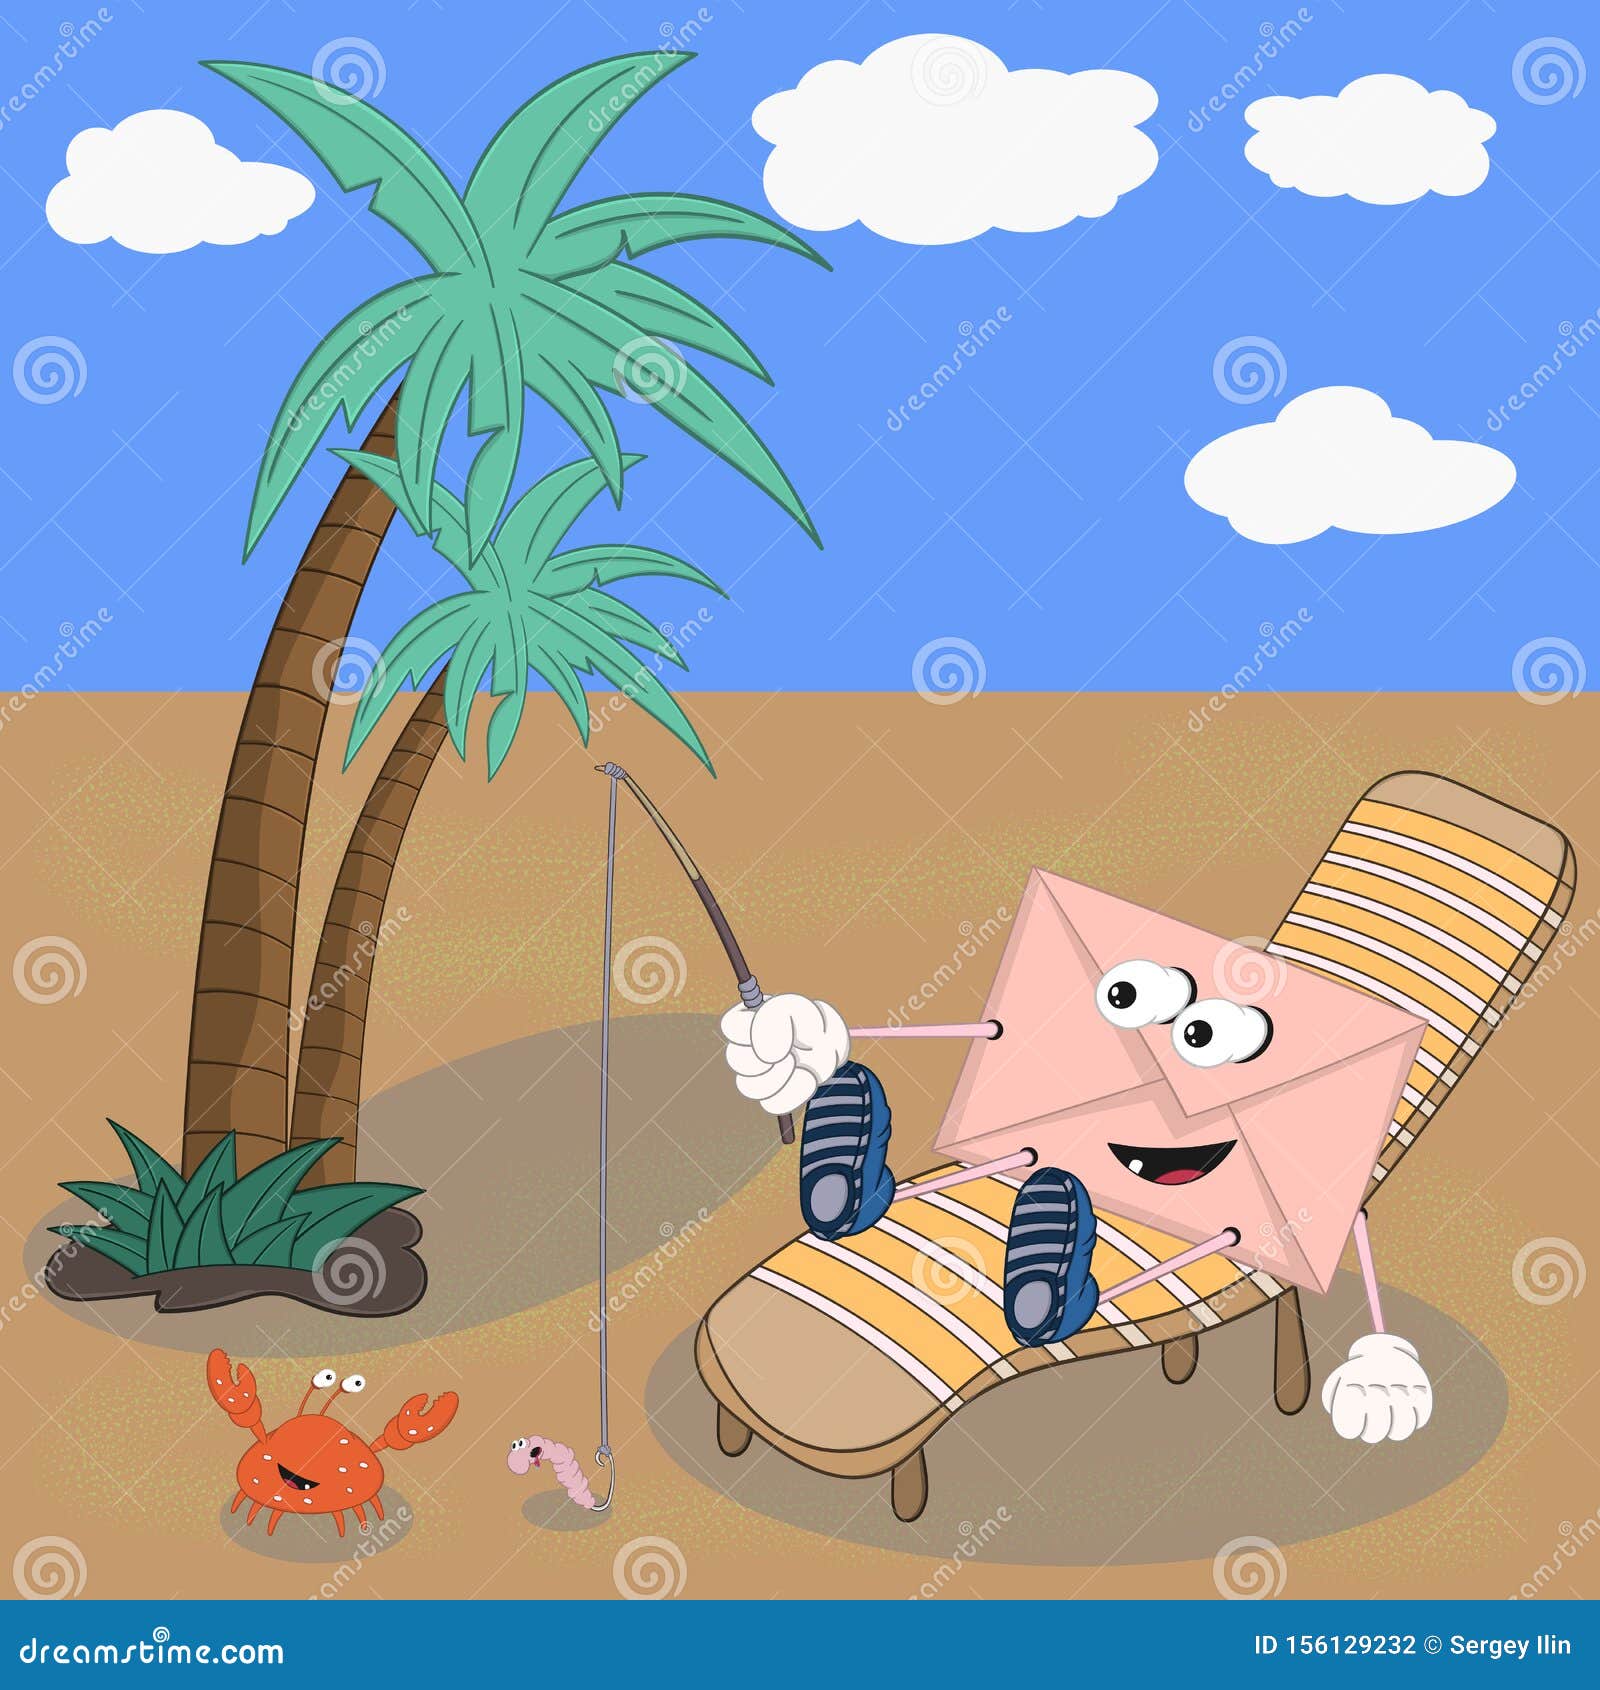 https://thumbs.dreamstime.com/z/funny-cartoon-envelope-vacation-desert-sits-couch-catches-crab-fishing-rod-using-worm-as-bait-hand-drawn-style-156129232.jpg